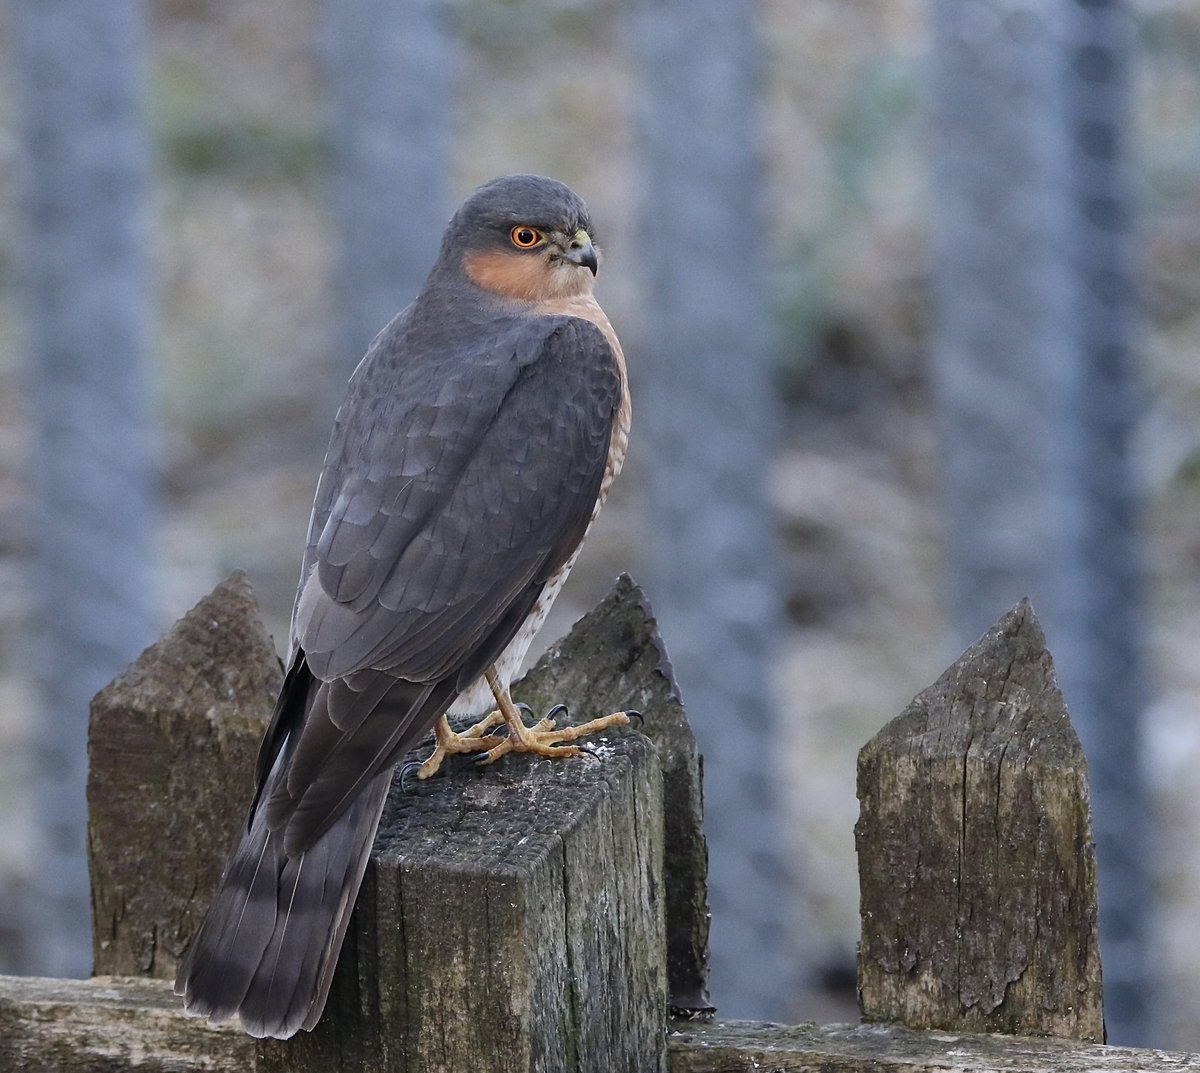 This little male Sparrowhawk has just paid a visit to my garden @DurhamBirdClub @BTO_GBW @Natures_Voice #birding #birdwatching #birdphotography #TwitterNatureCommunity #TwitterNaturePhotography #wildlifephotography